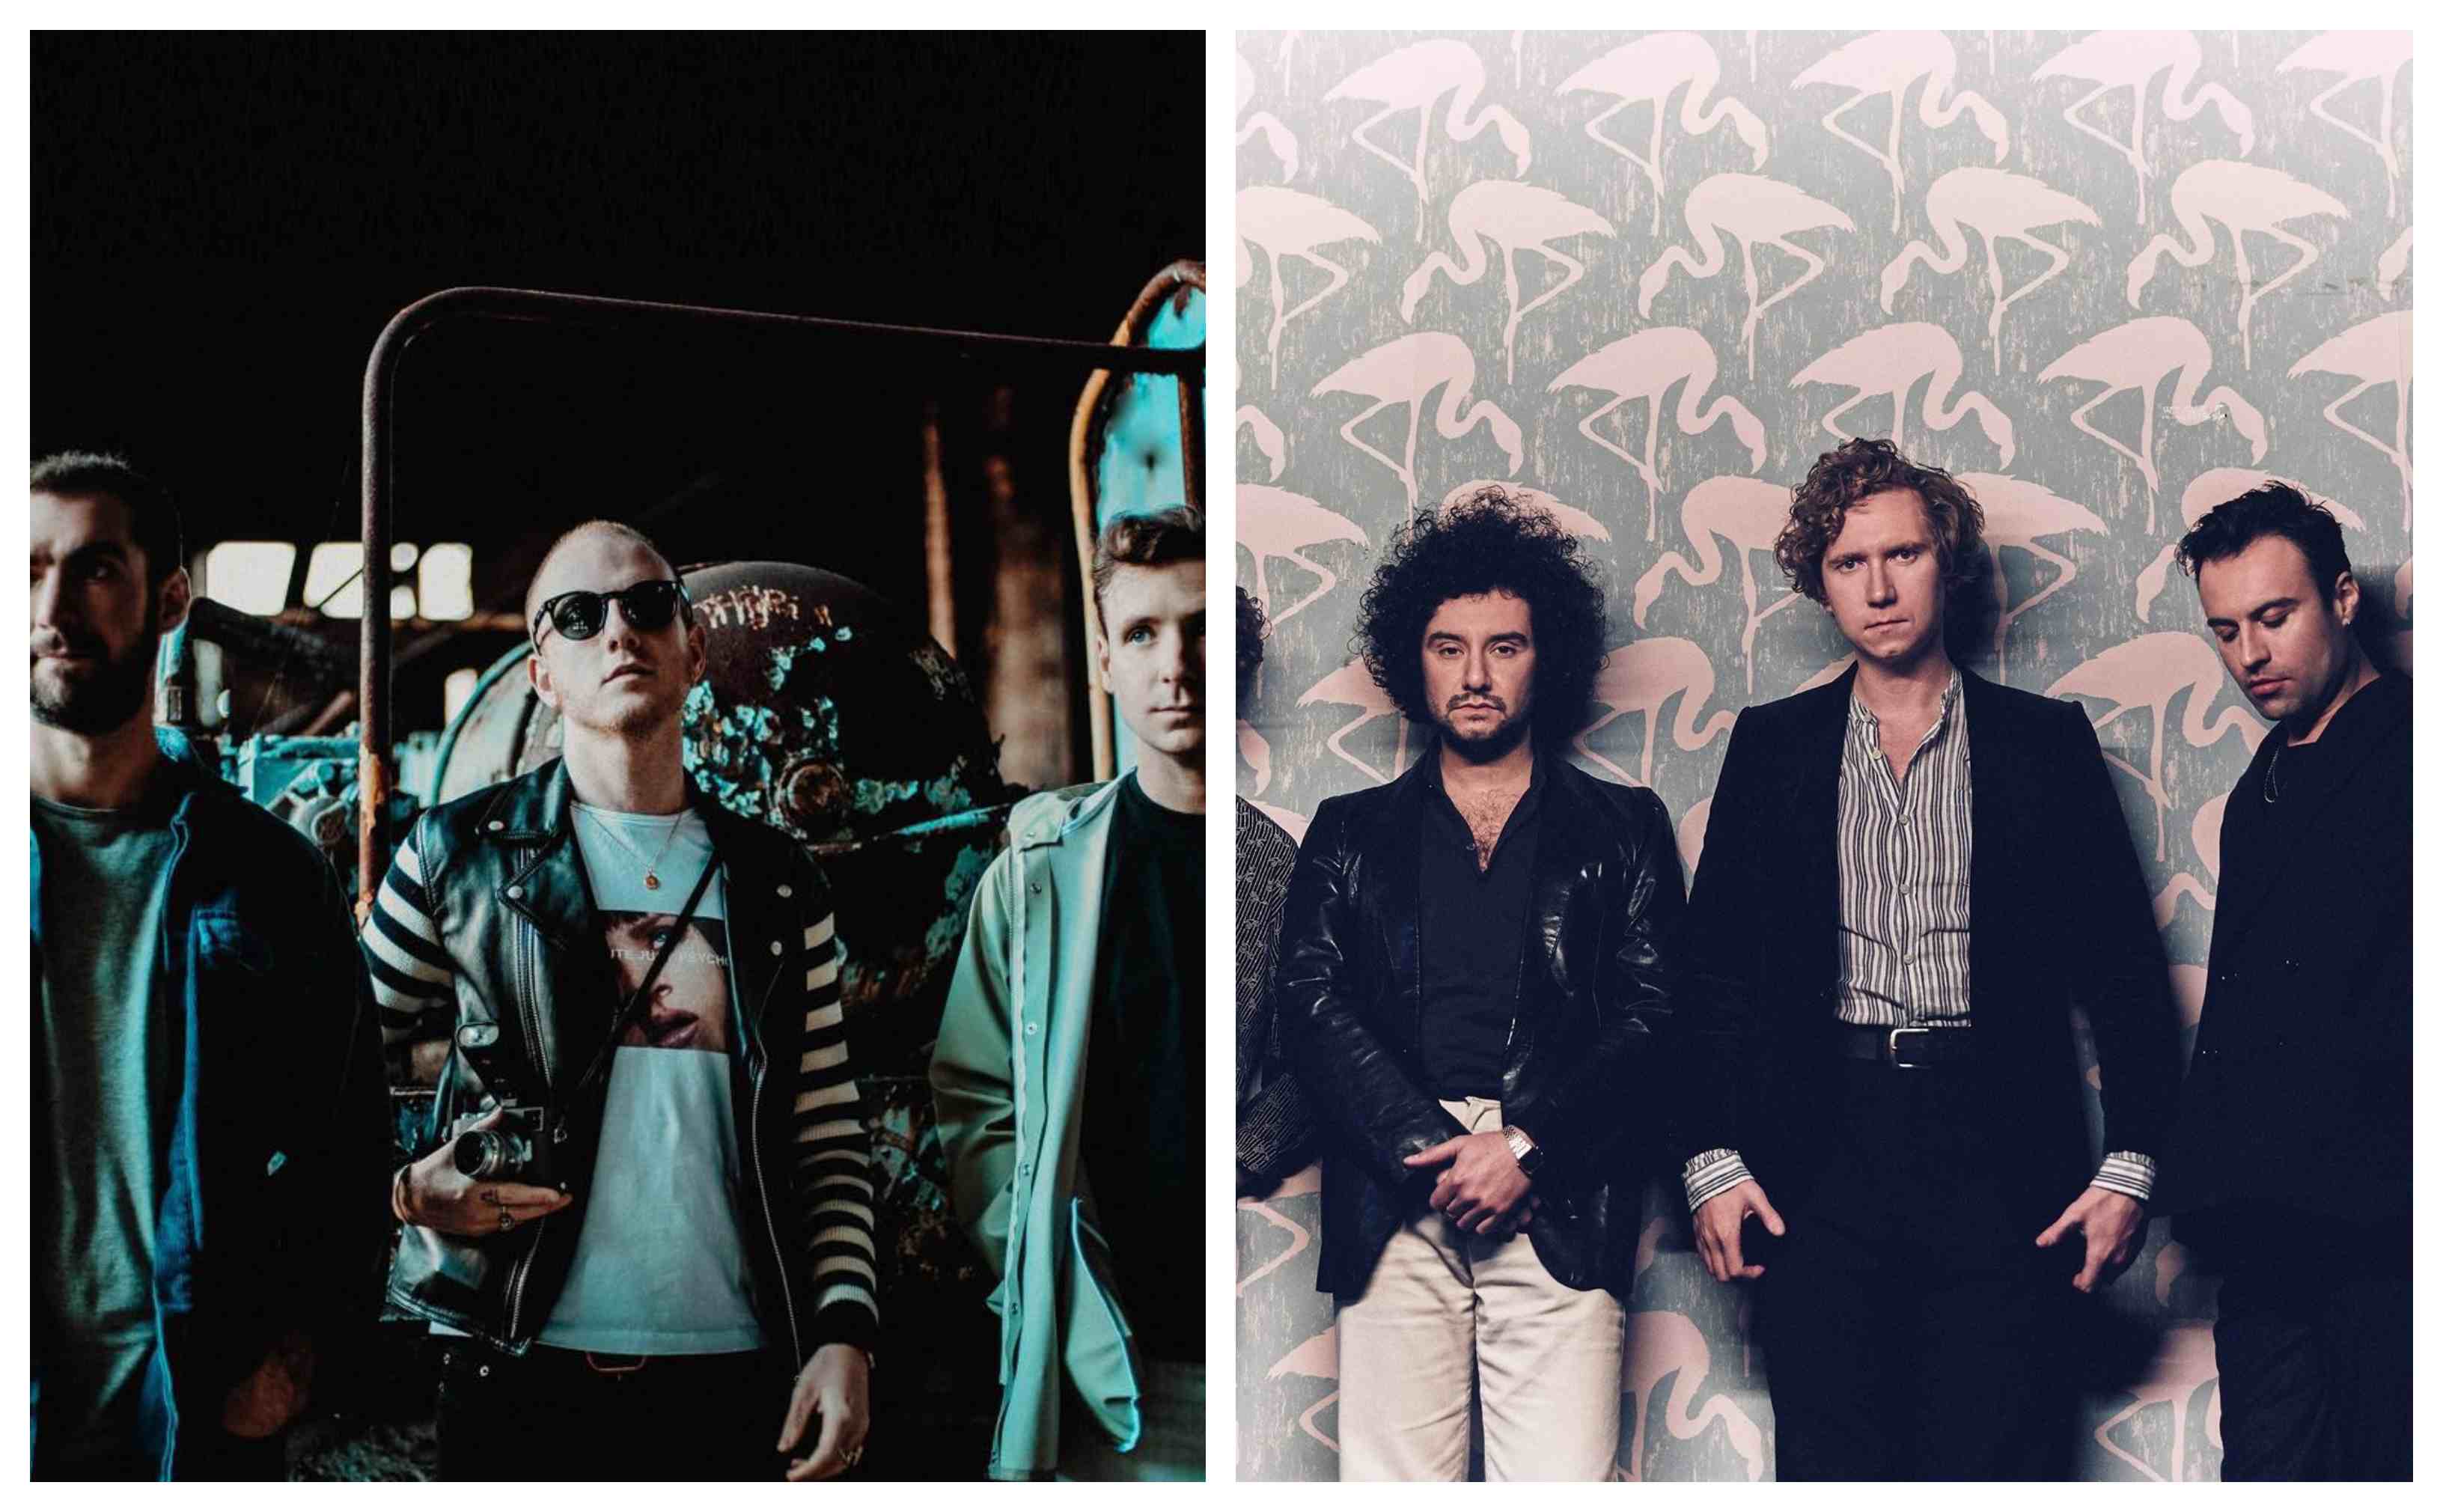 Two Door Cinema Club and The Kooks. Photos from their Facebook pages